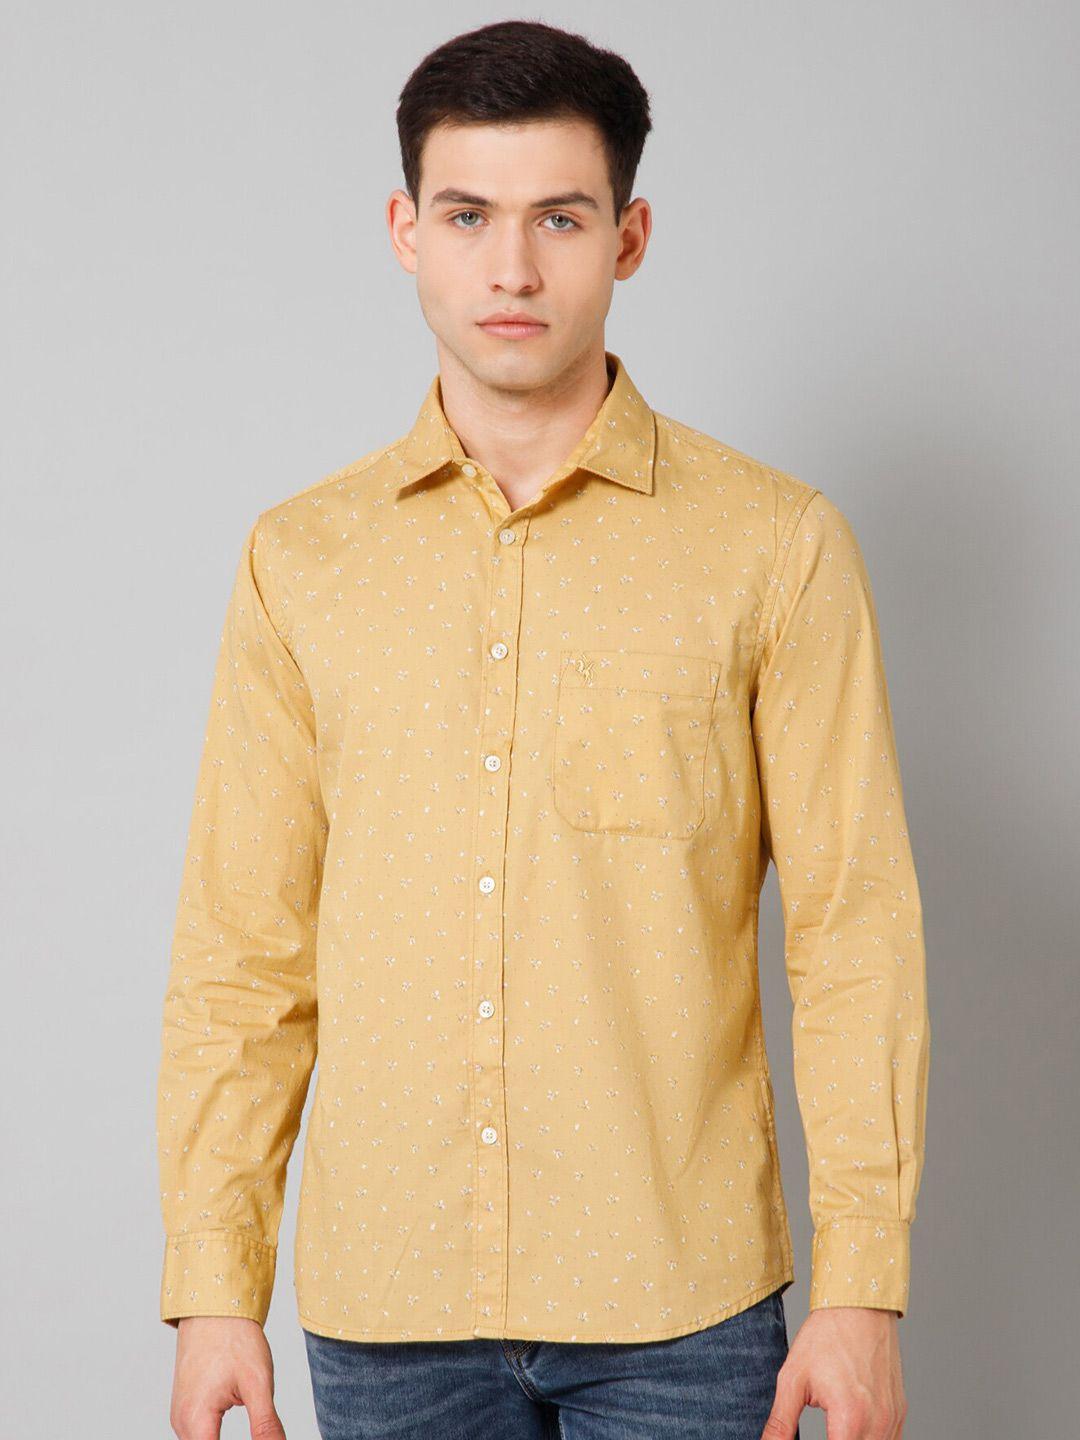 cantabil-spread-collar-comfort-floral-printed-casual-cotton-shirt